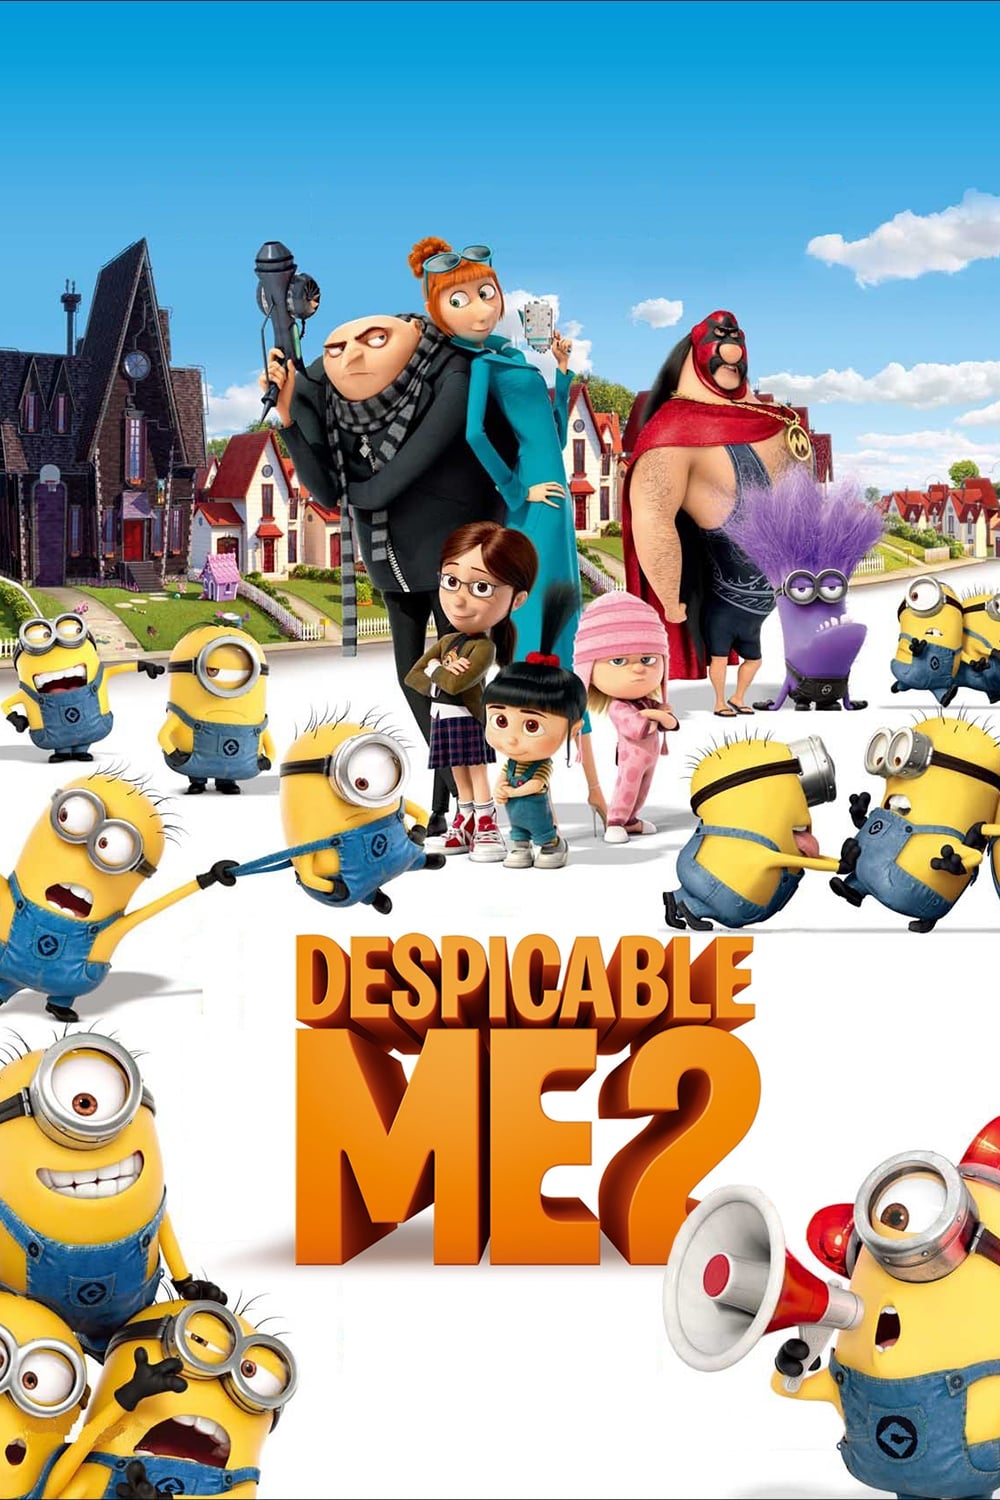 Despicable Me 2 (2013) REMUX 4K HDR Latino – CMHDD